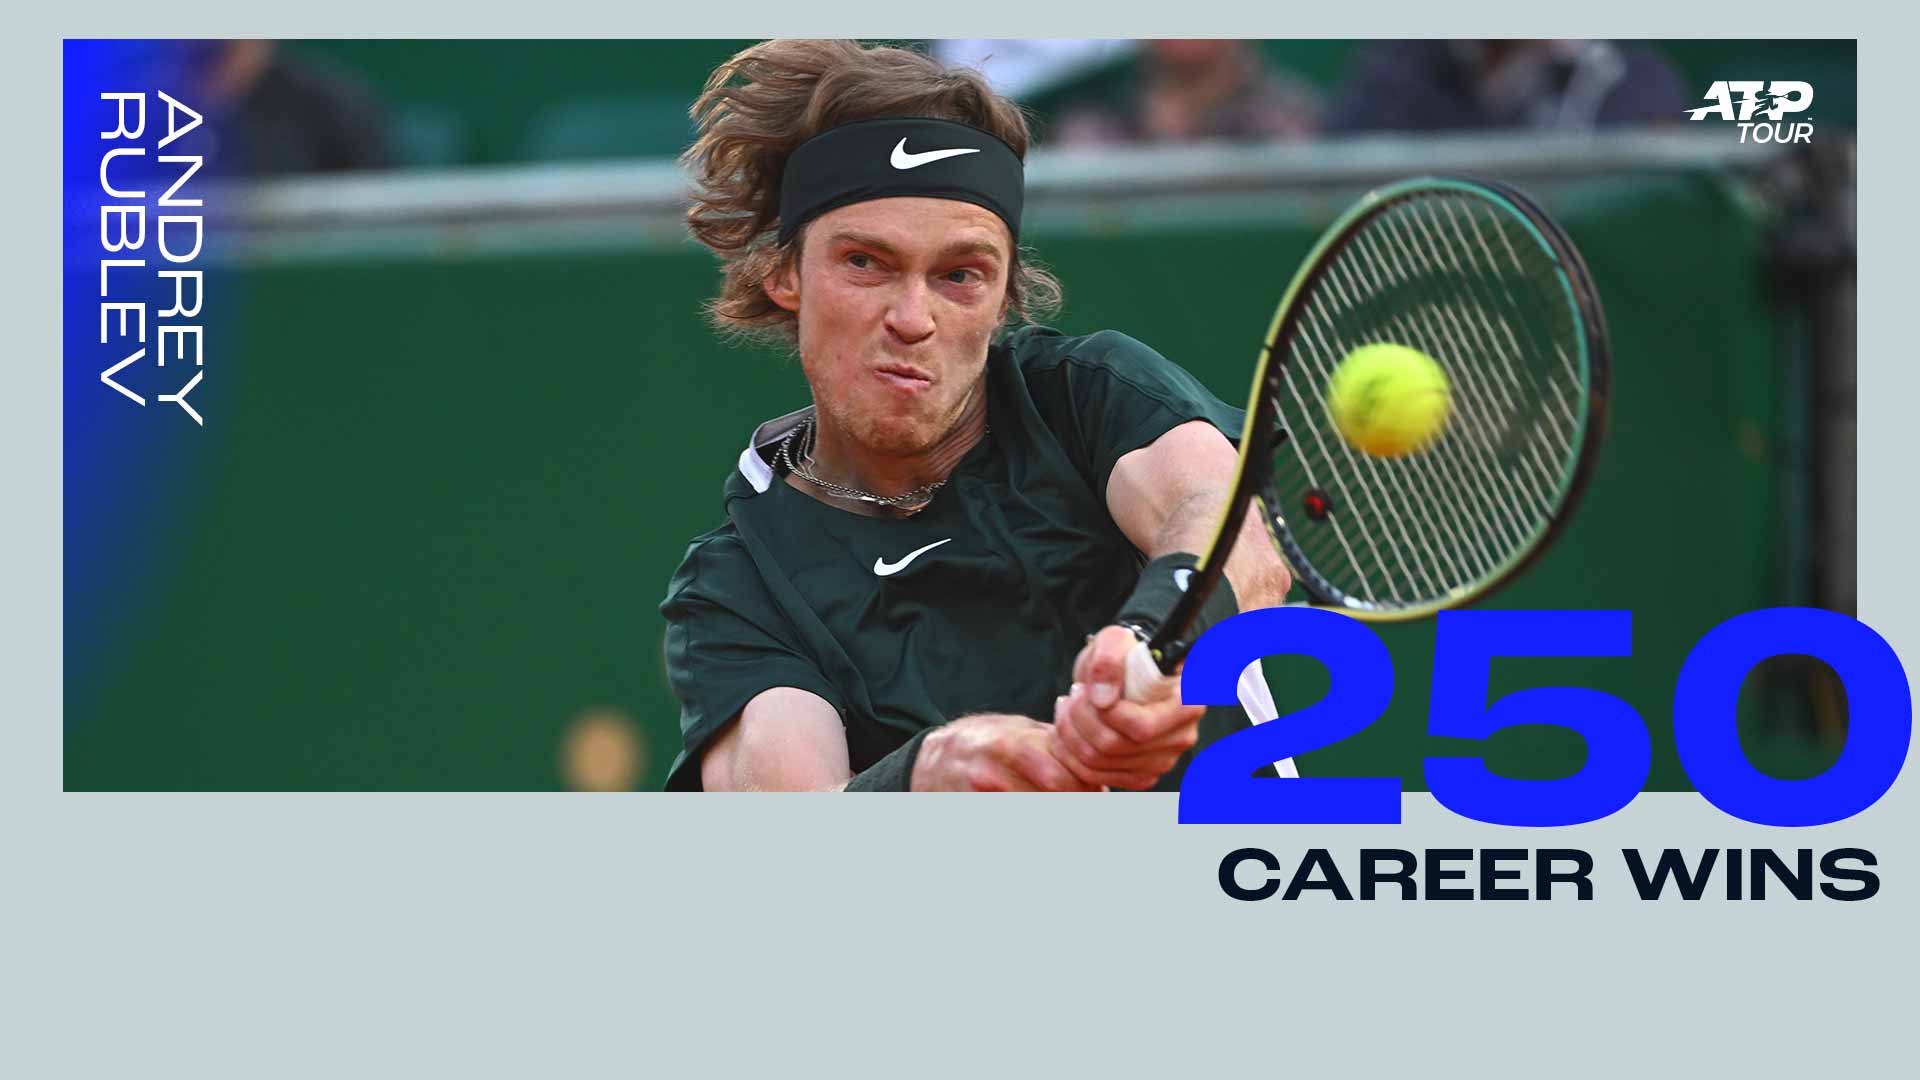 Rublev Earns 250th Win, Zverev Rallies In Monte-Carlo ATP Tour Tennis